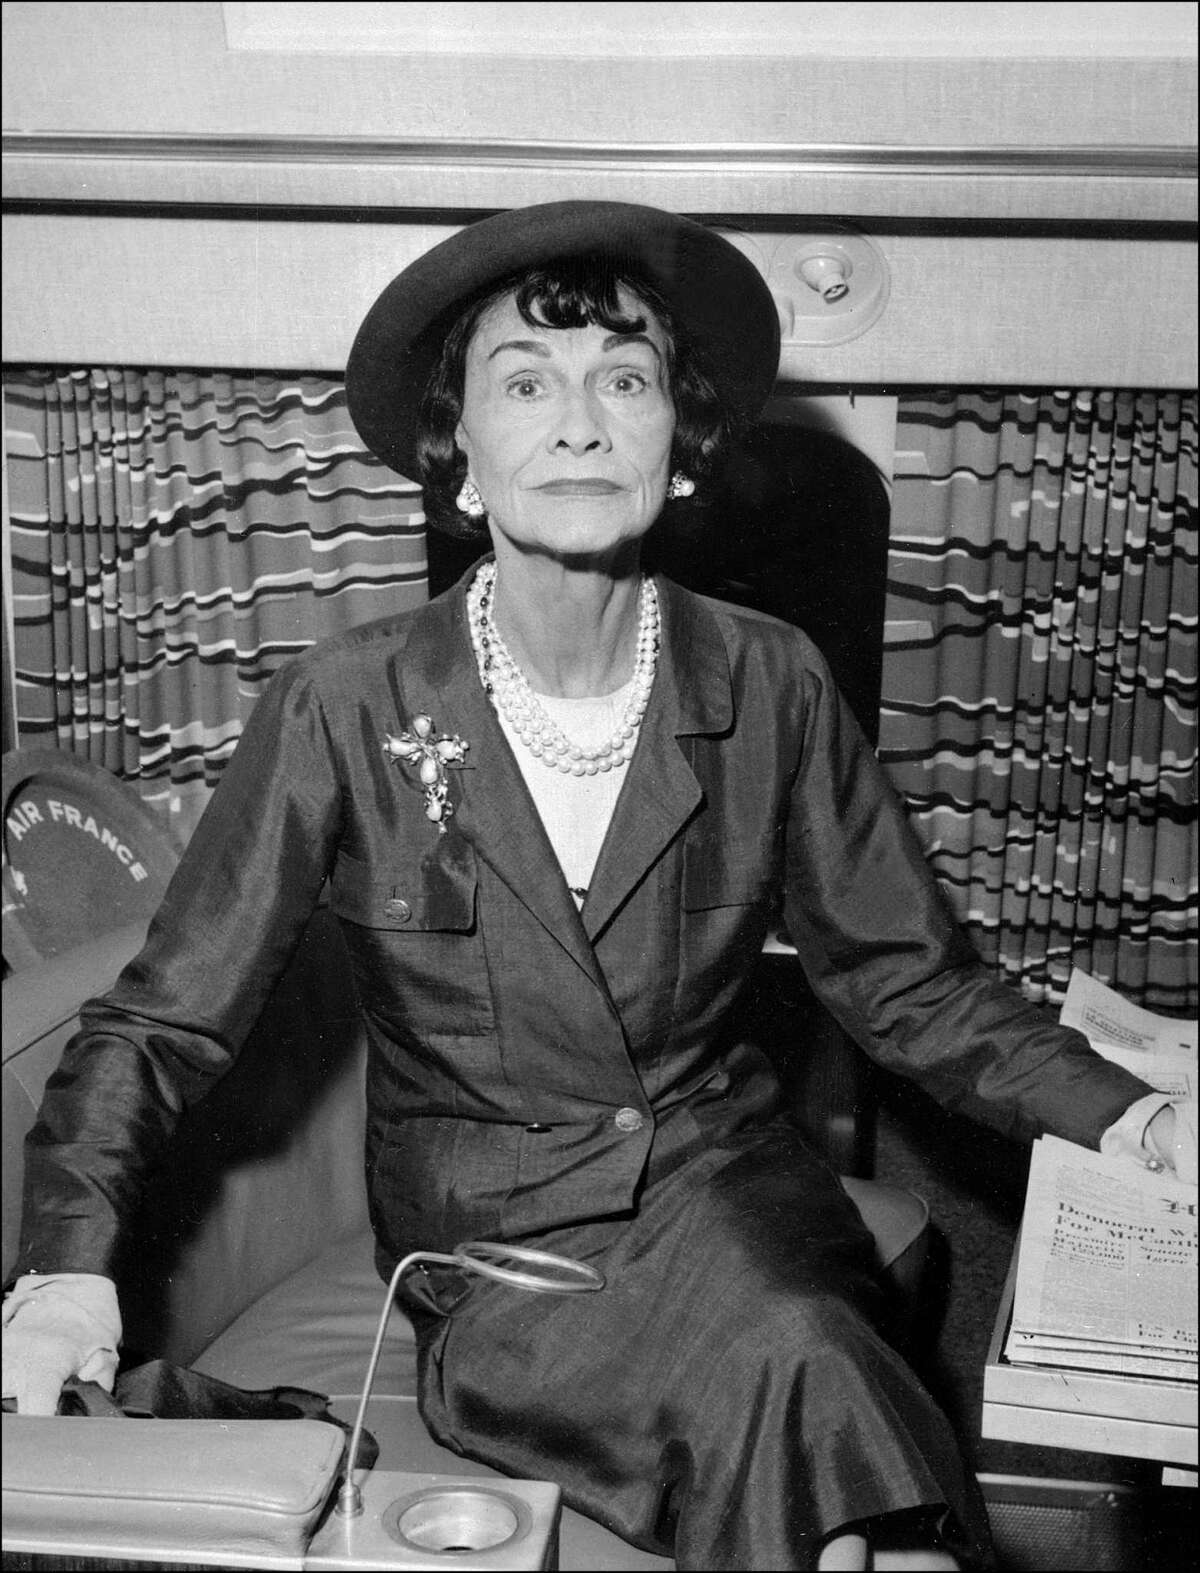 Jan 28 1968  Paris France  File Photo COCO CHANEL born Gabrielle  Bonheur Chanel was a Stock Photo Picture And Rights Managed Image  Pic ZUK19680128AVEK09370  agefotostock